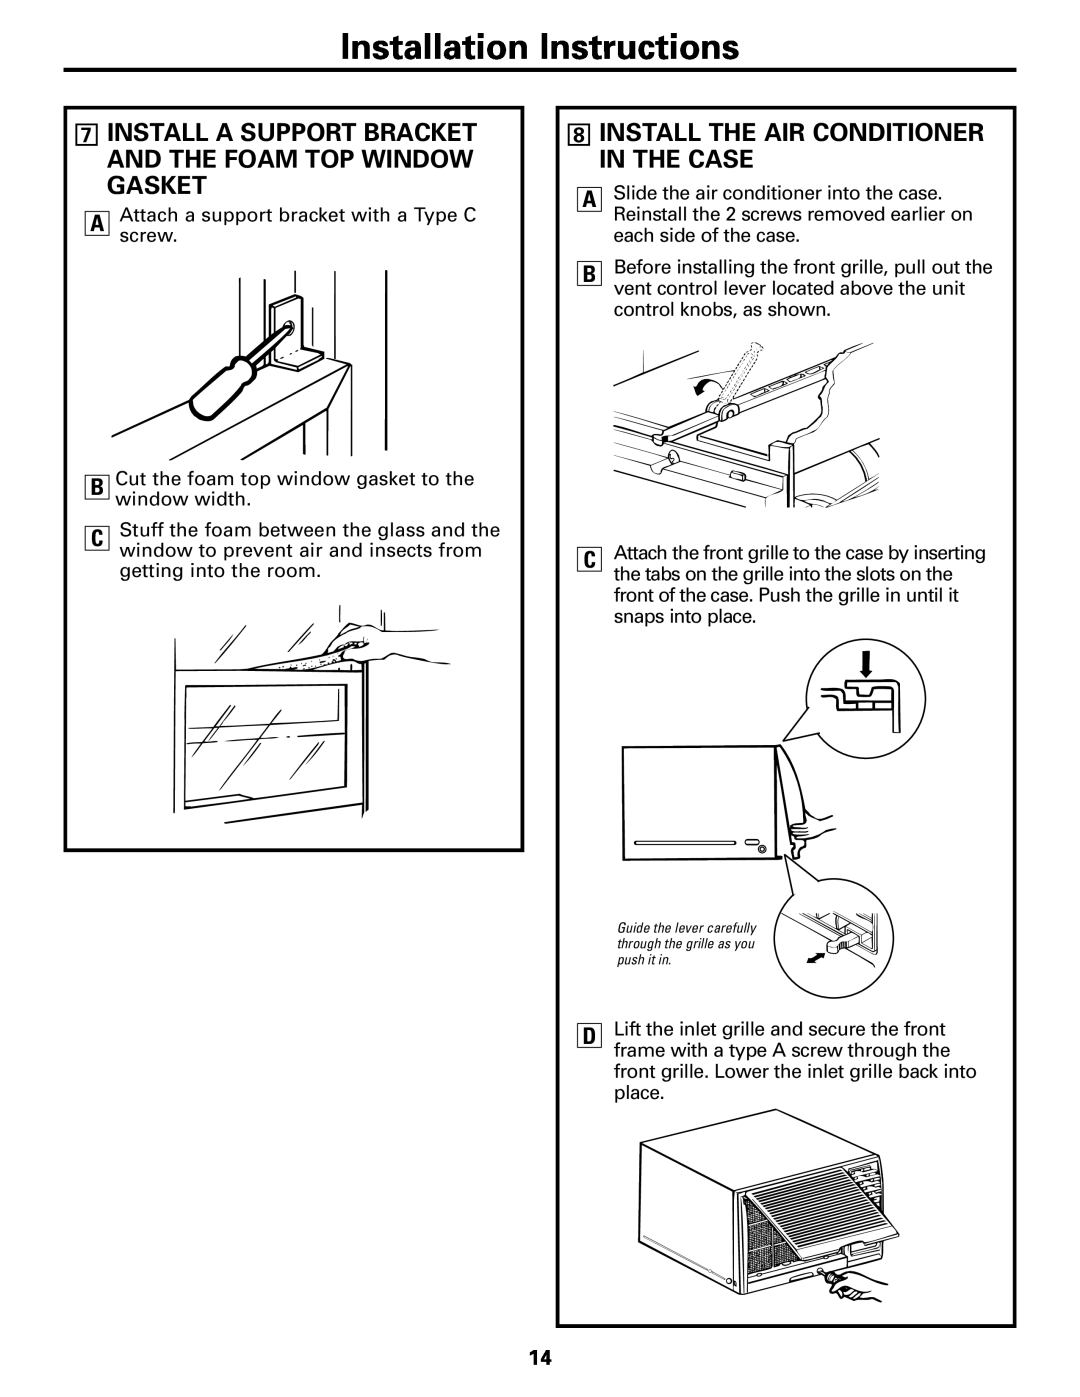 GE AGF18 operating instructions 8INSTALL THE AIR CONDITIONER IN THE CASE, Installation Instructions 